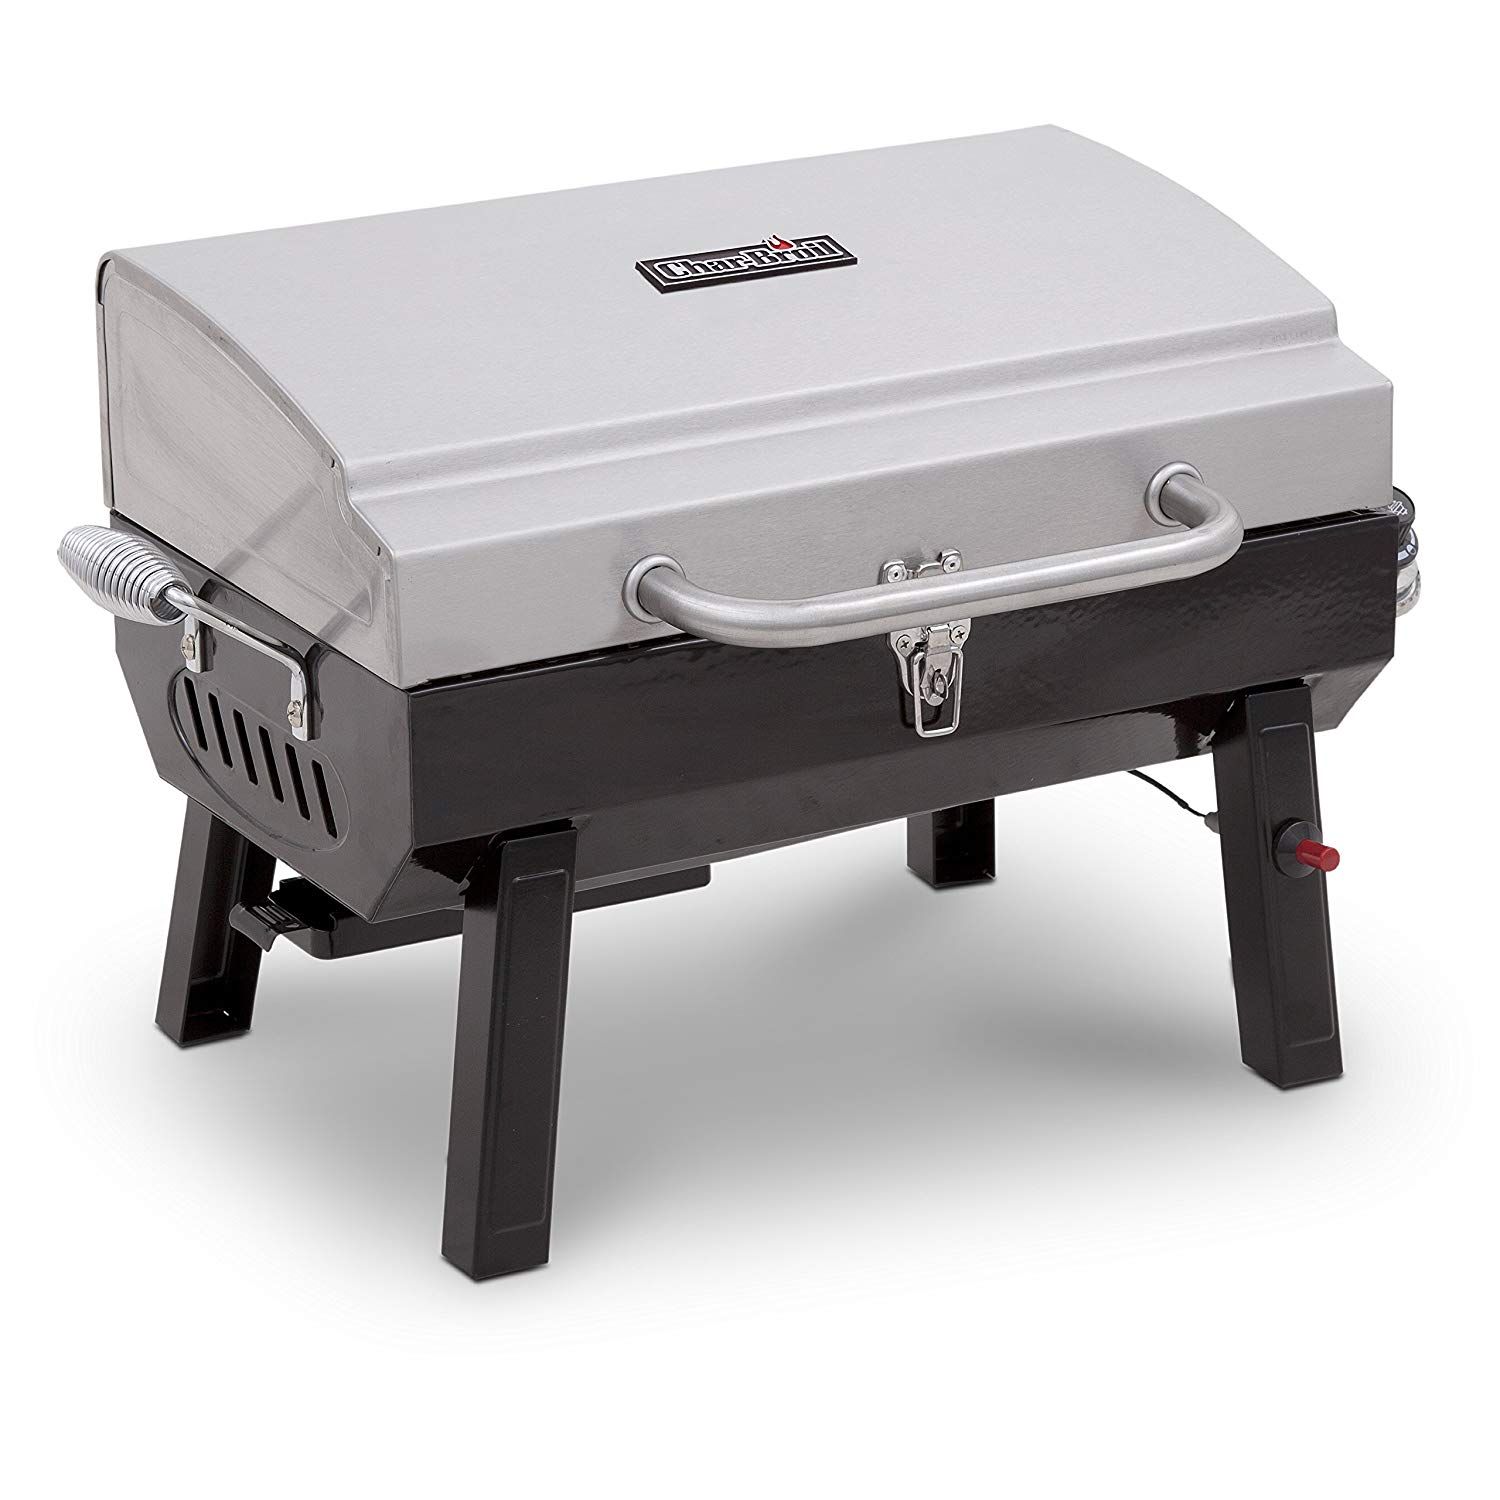 Tailgate Grill - Buy Electric, Charcoal and Propane Grills At Best Prices